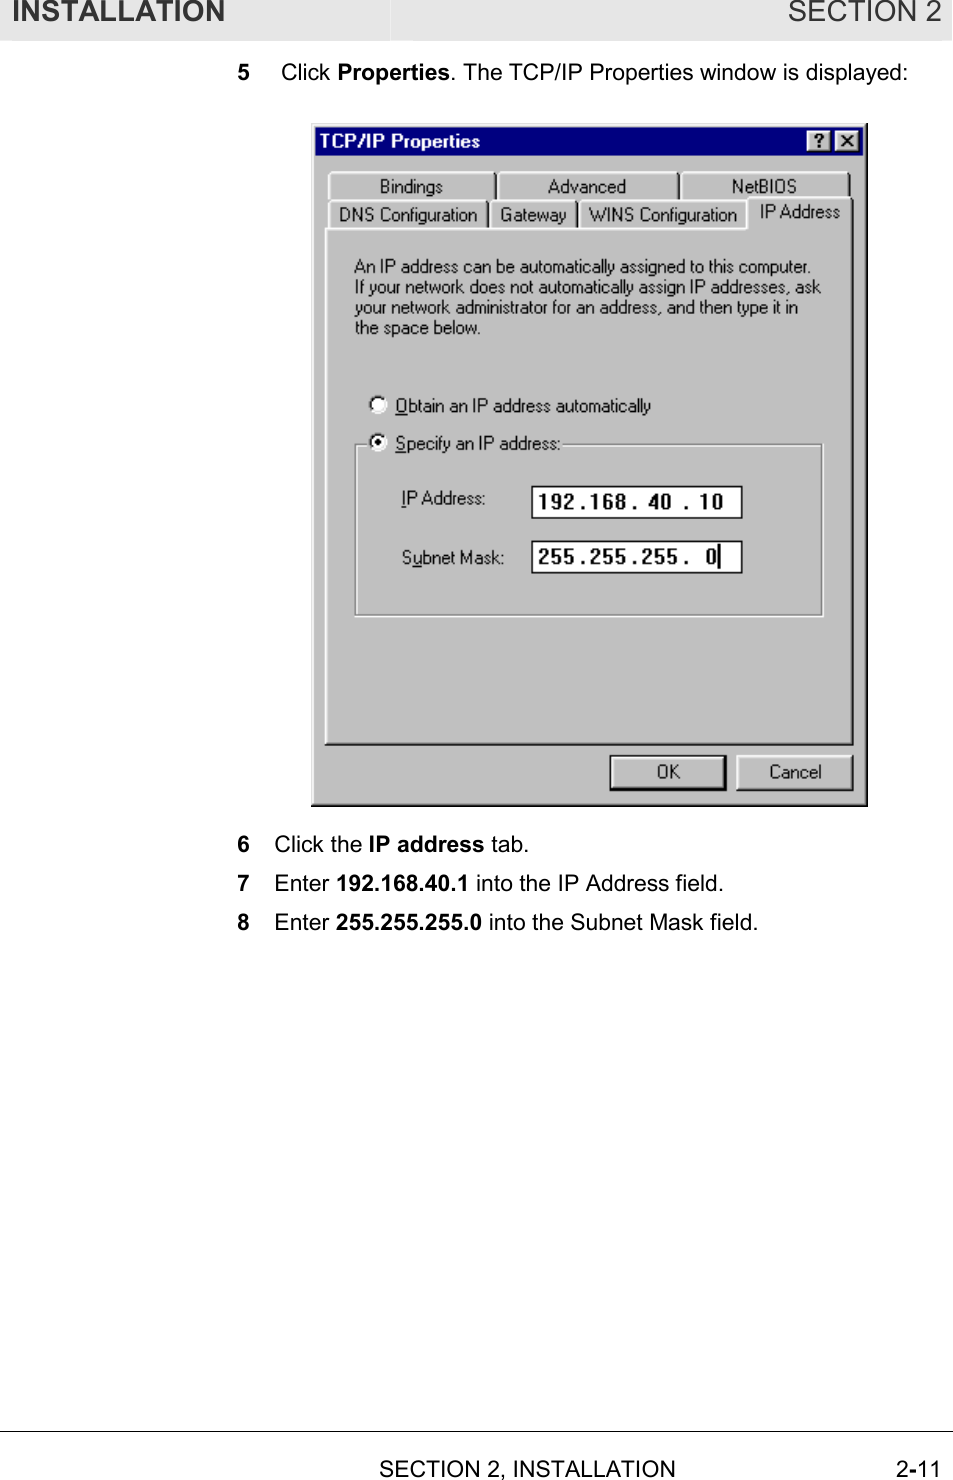 INSTALLATION SECTION 2  SECTION 2, INSTALLATION 2-11 5   Click Properties. The TCP/IP Properties window is displayed:  6  Click the IP address tab. 7  Enter 192.168.40.1 into the IP Address field. 8  Enter 255.255.255.0 into the Subnet Mask field. 